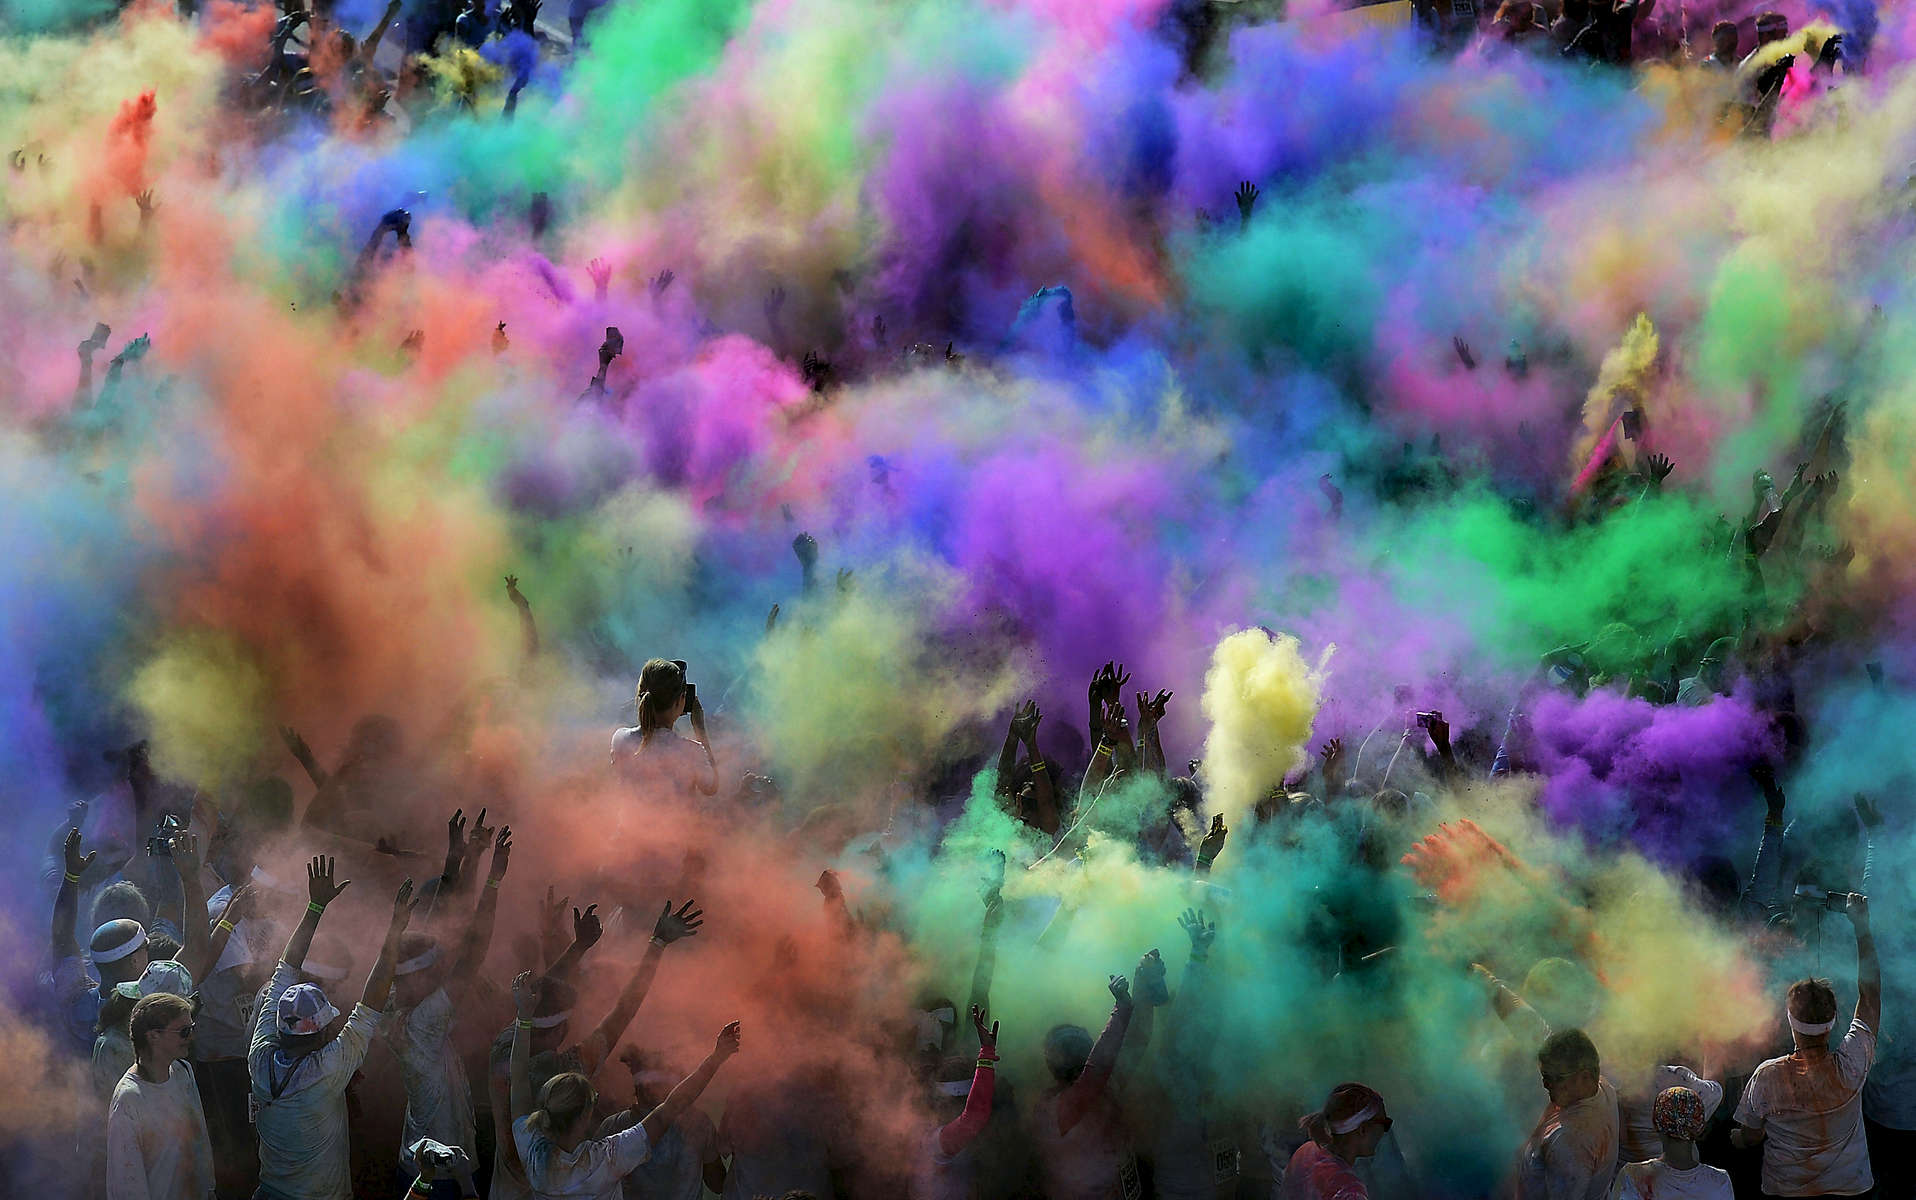 At the end of the 5K Color Run, participants openpackets of colored powder at LP Field in Nashville, Tenn. (Mark Zaleski/ For The Tennessean)